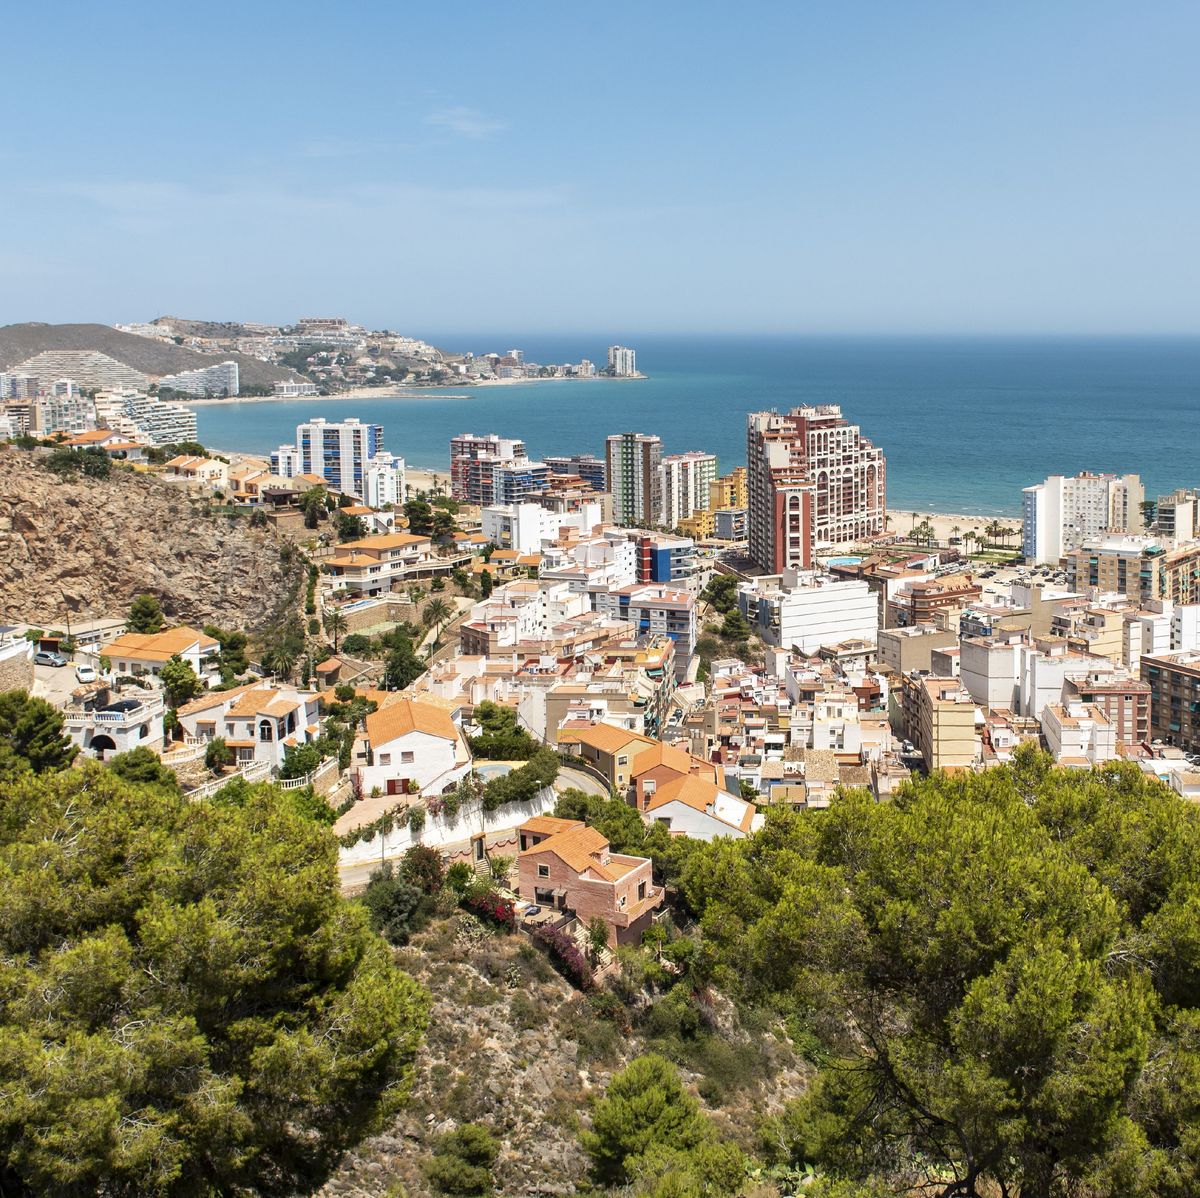 panoramic view of seaside town of cullera from the castle, spain photo by petr svarcucguniversal images group via getty images